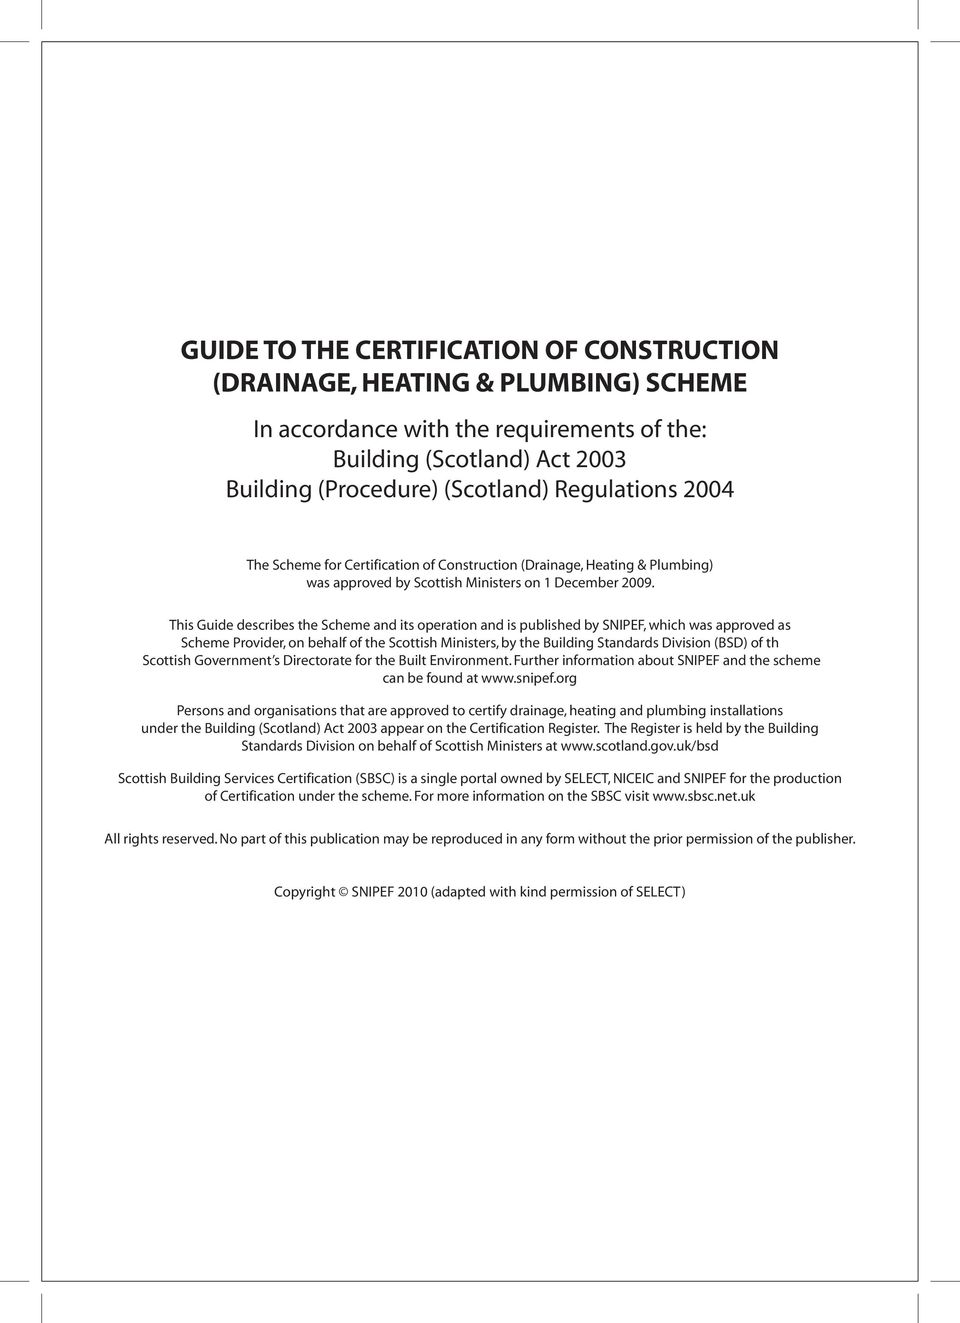 This Guide describes the Scheme and its operation and is published by SNIPEF, which was approved as Scheme Provider, on behalf of the Scottish Ministers, by the Building Standards Division (BSD) of